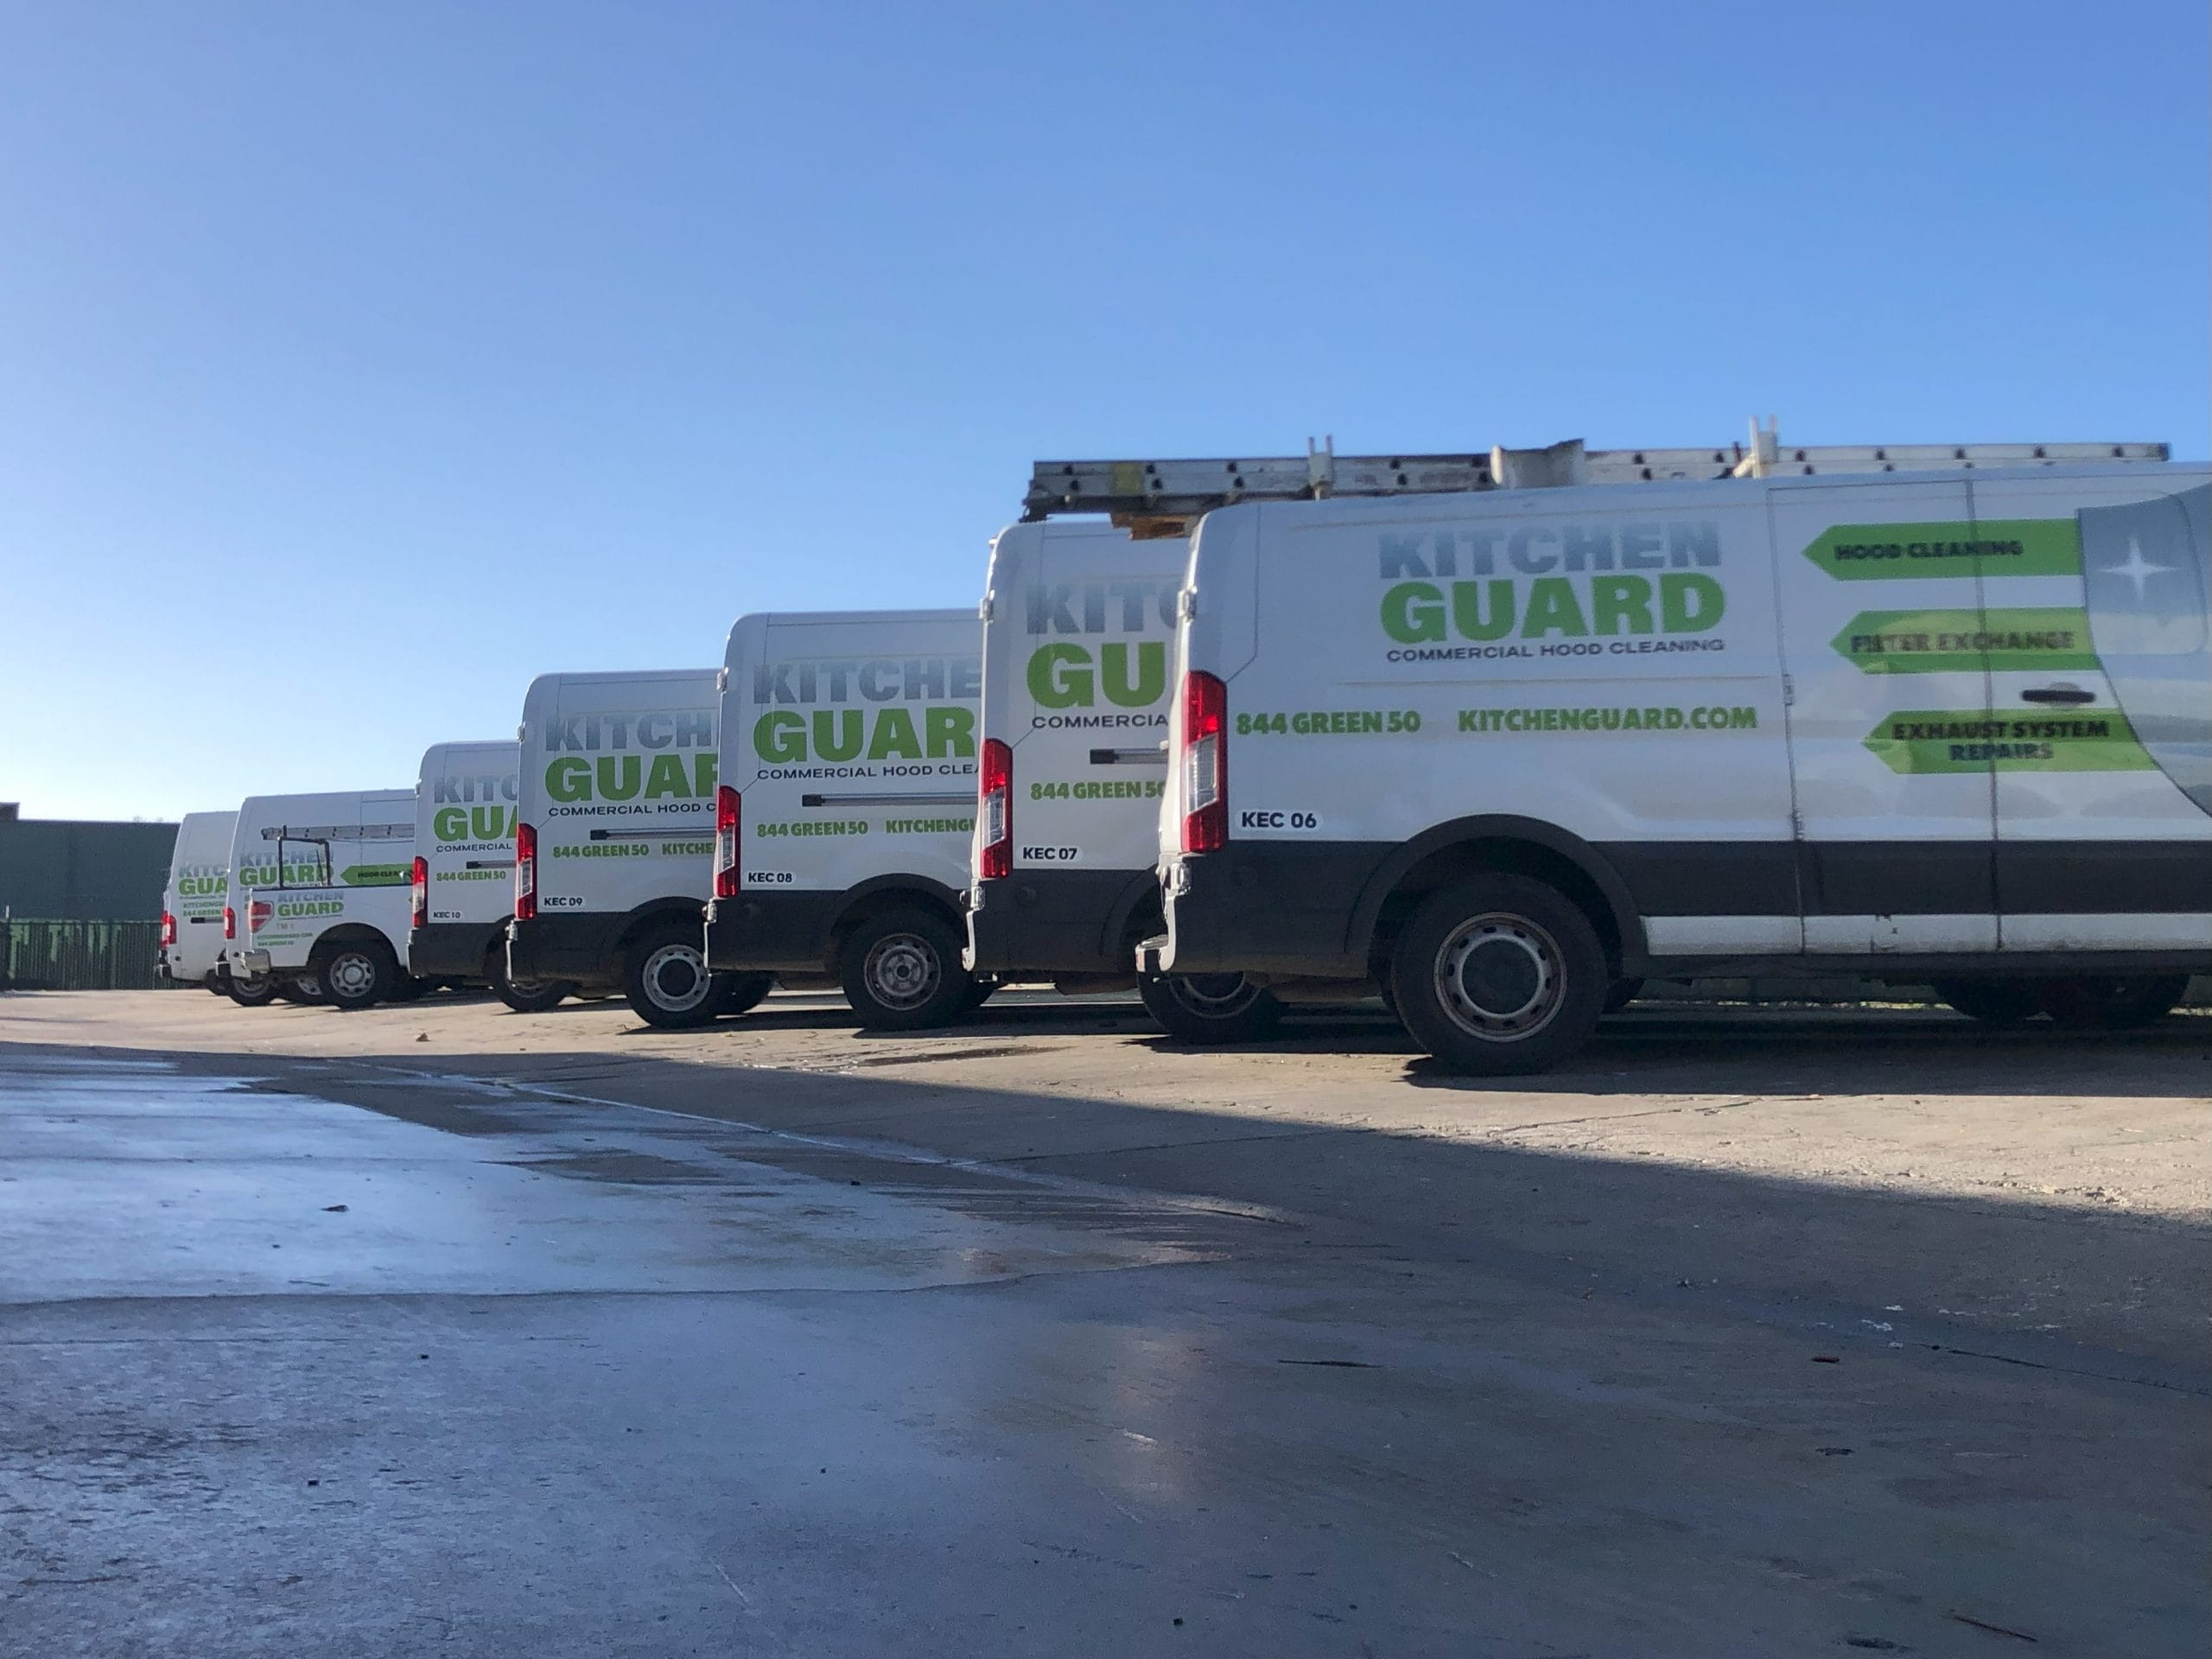 image of 8 vans of Kitchen Guard lined up in a parking lot